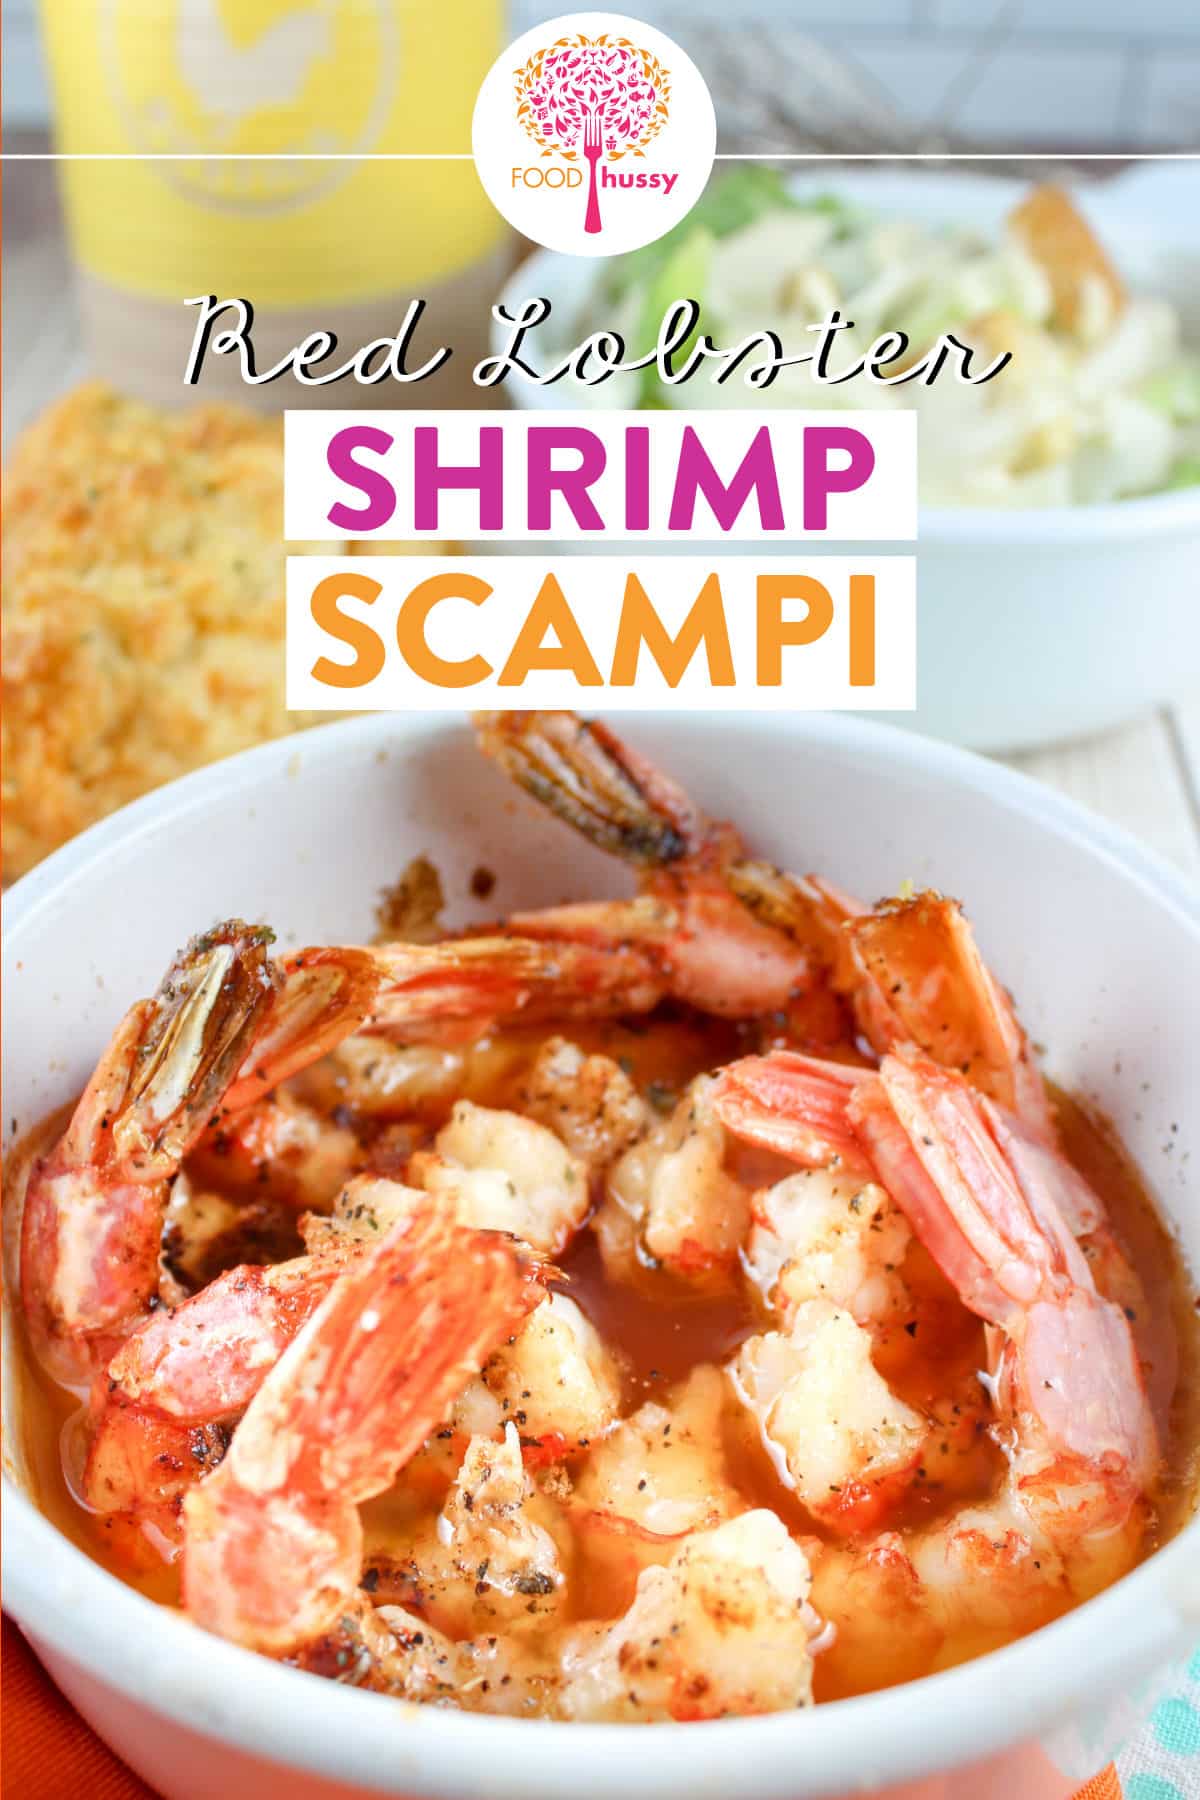 The Famous Red Lobster Shrimp Scampi has always been one of my favorite dishes! I was shocked at how easy it was to make it at home! This copycat recipe version is full of garlicky buttery goodness and even better than the restaurant version!  via @foodhussy